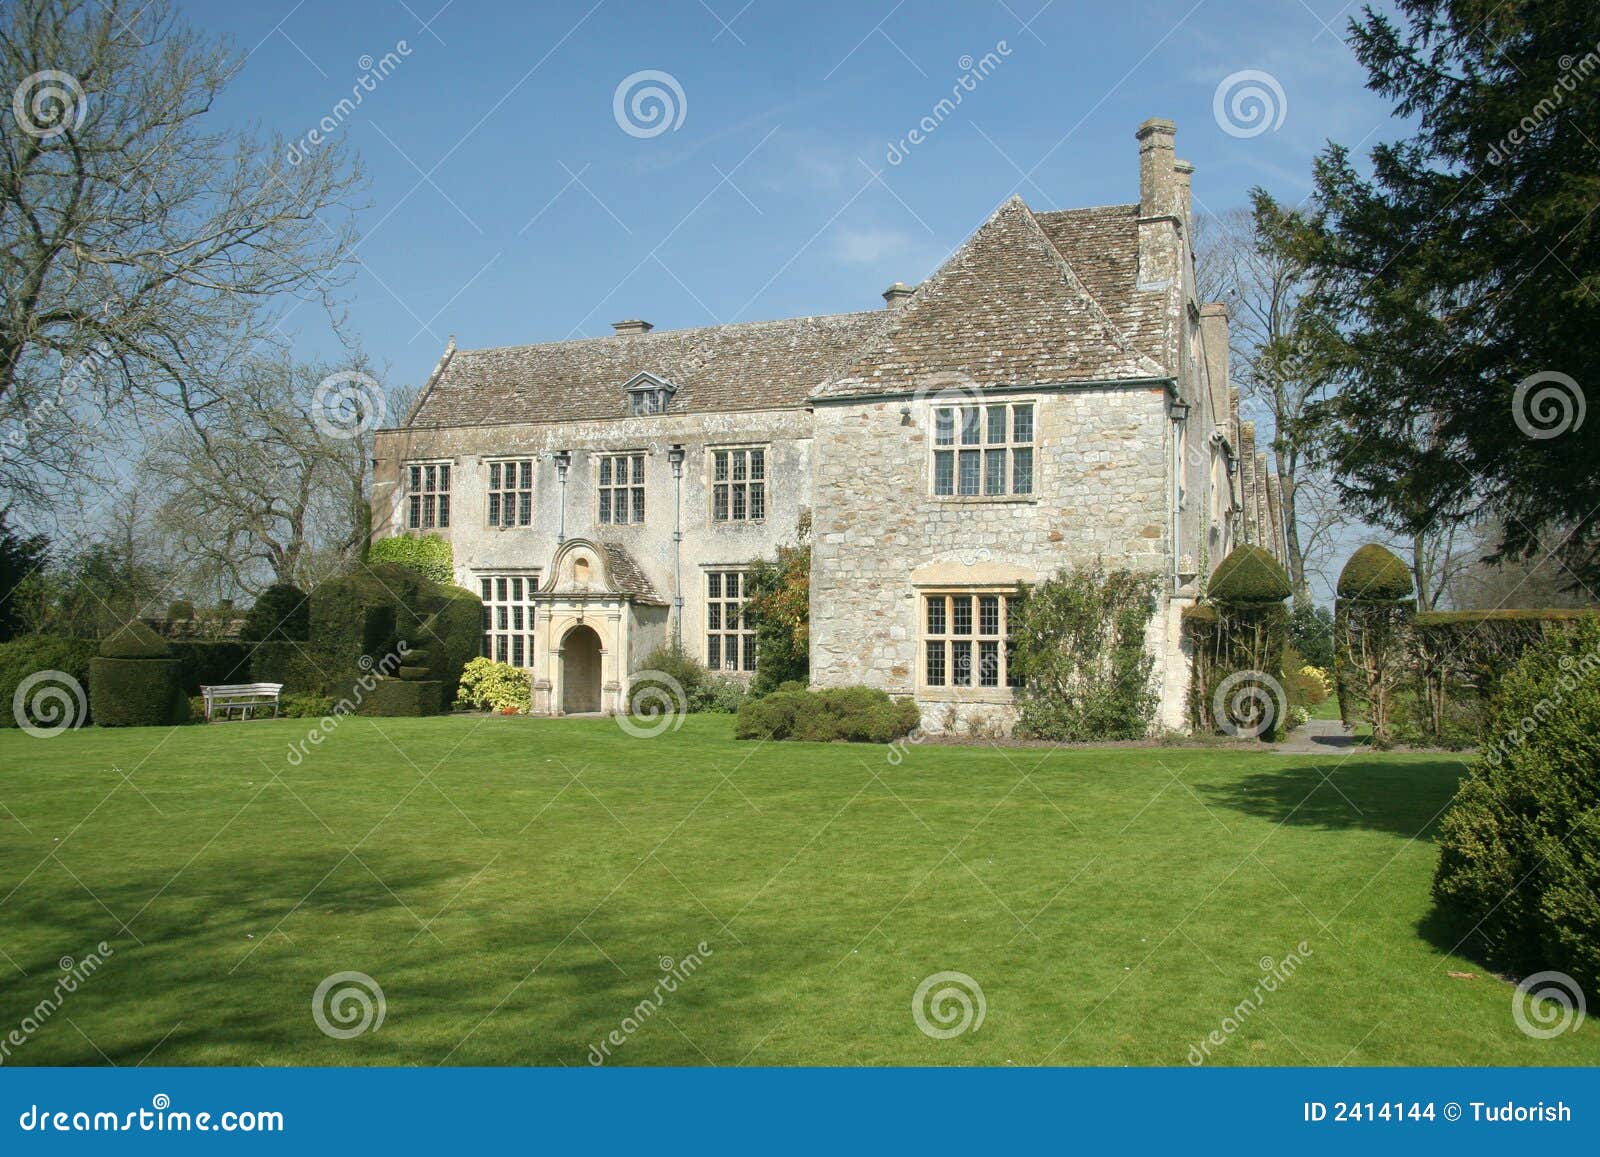 english country house